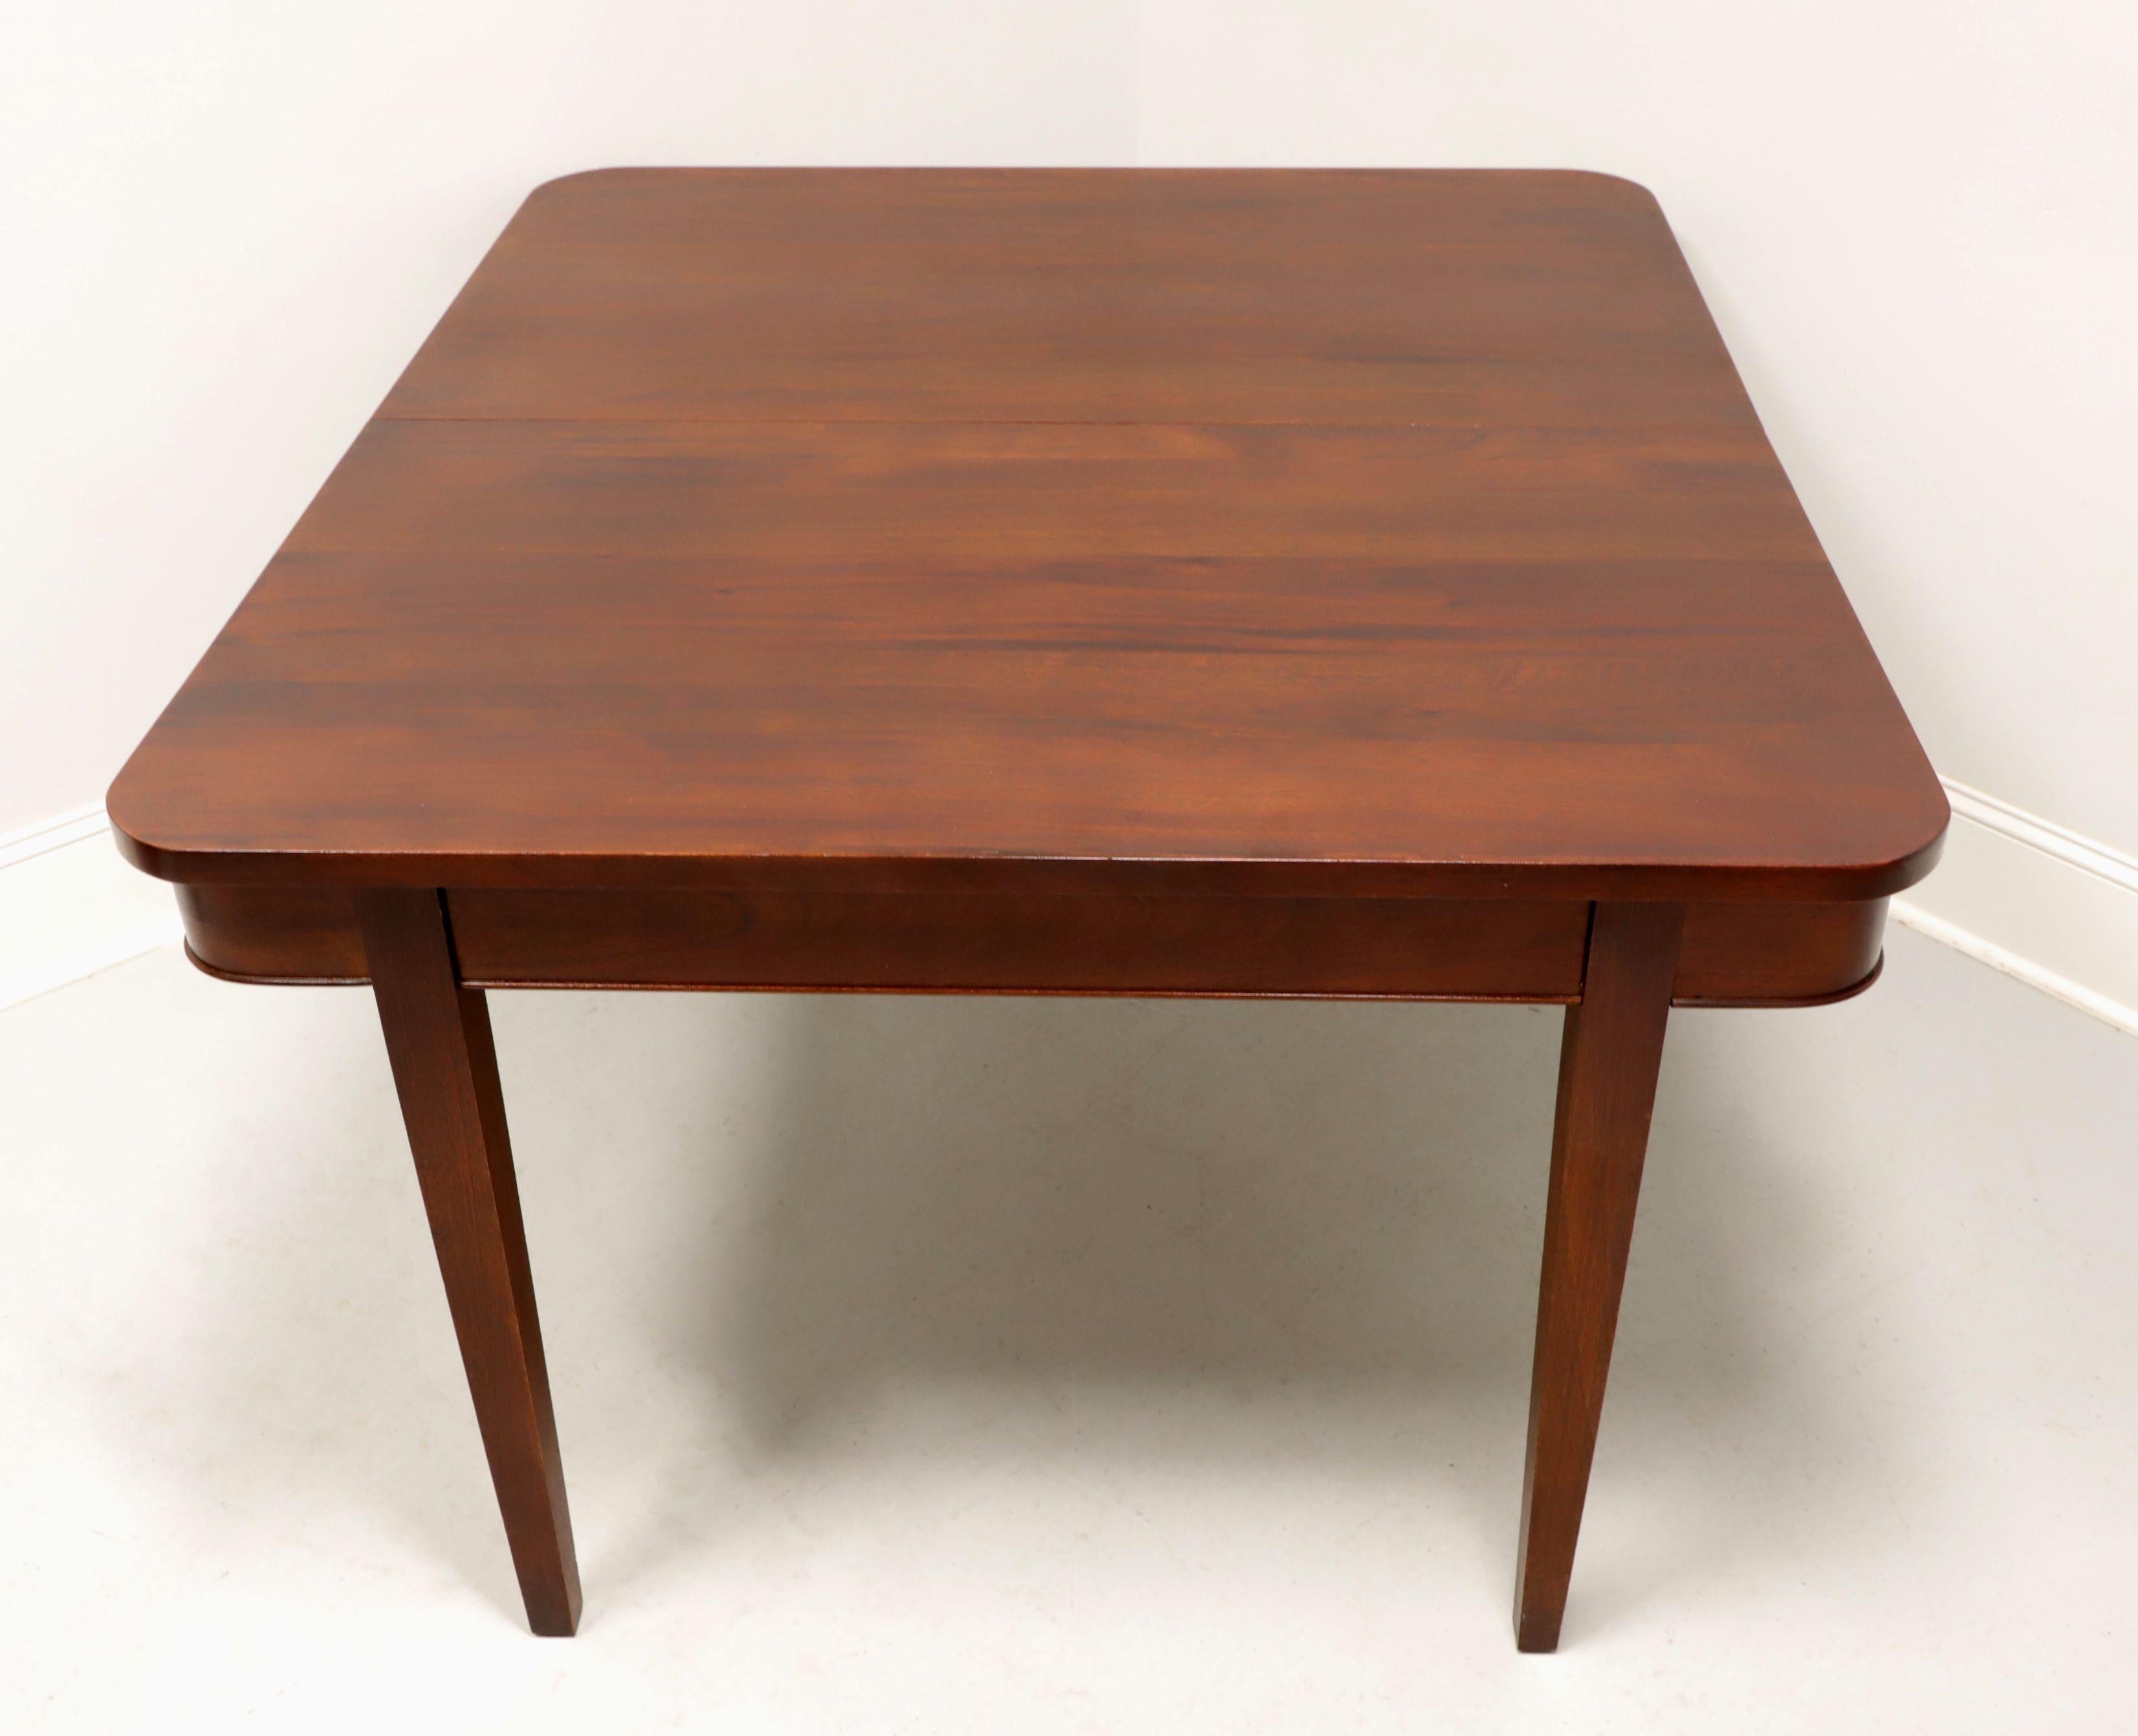 An adapted Colonial style dining table by high-quality furniture maker Craftique. Solid mahogany with their Old Wood finish, rounded corners & smooth edge to the top, rounded apron with bevel edge, and four inset from corner edge tapered straight